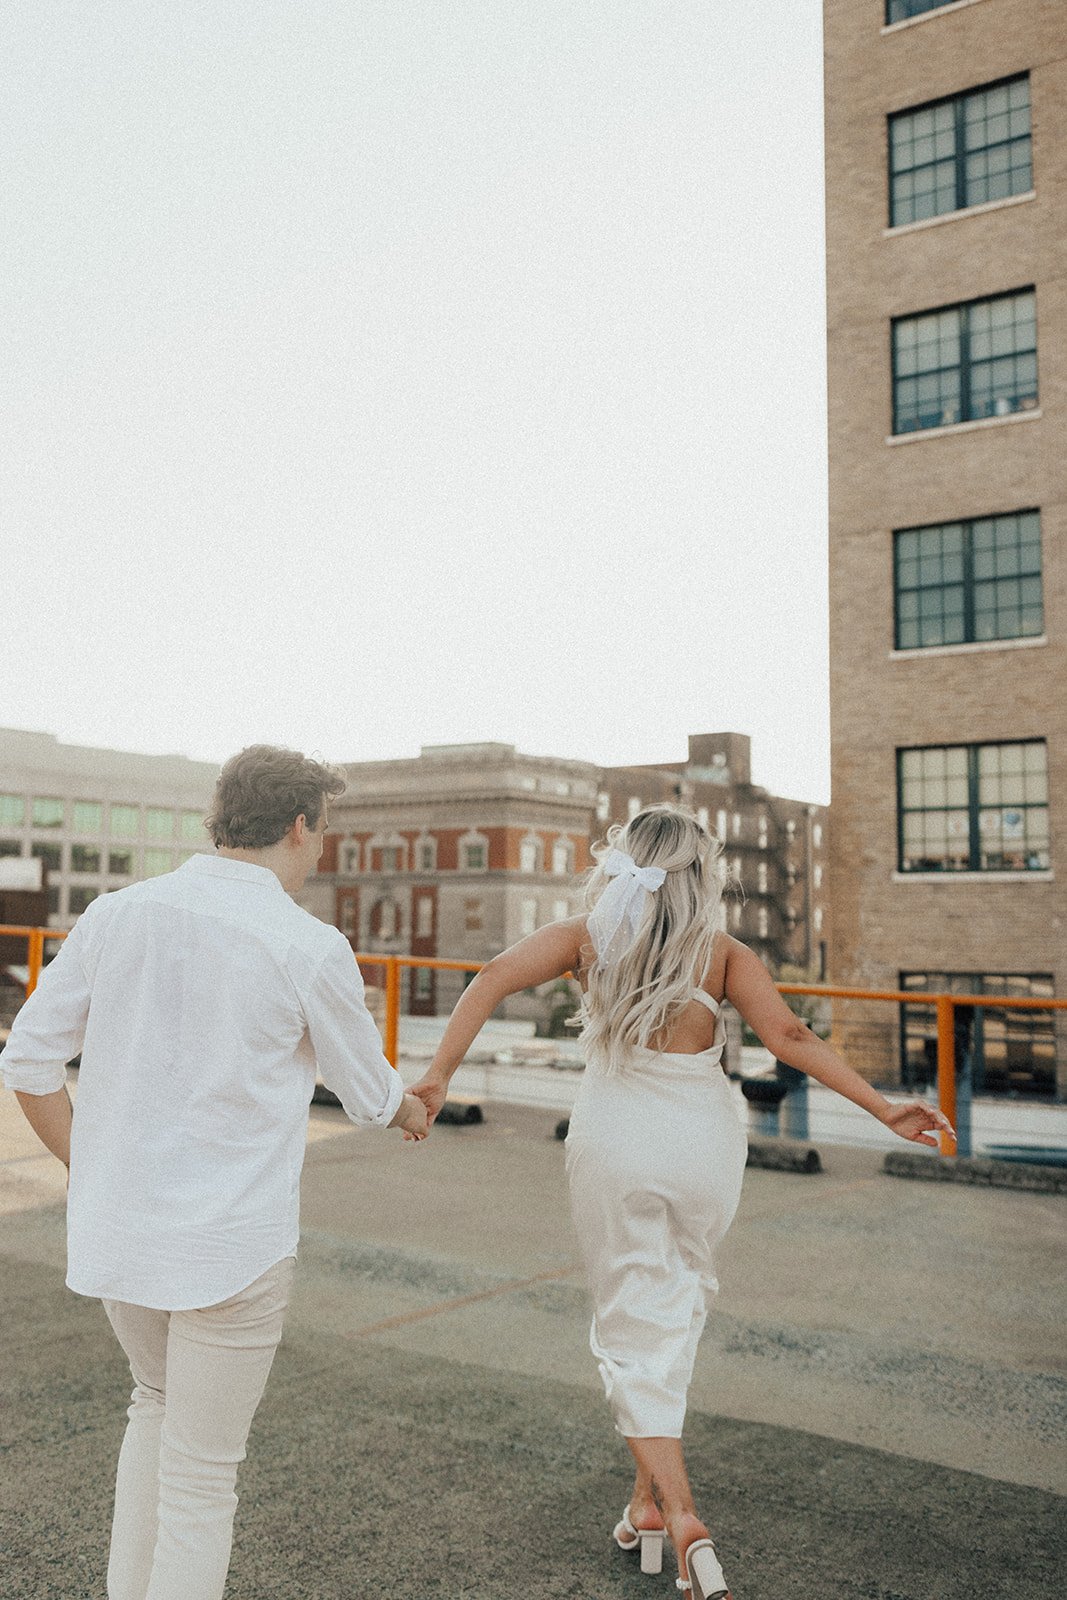 hannah-and-trey-parking-can-be-fun-downtown-memphis-river-walk-mississippi-beach-tennessee-wedding-photographer-jo-darling-photography-141.jpg